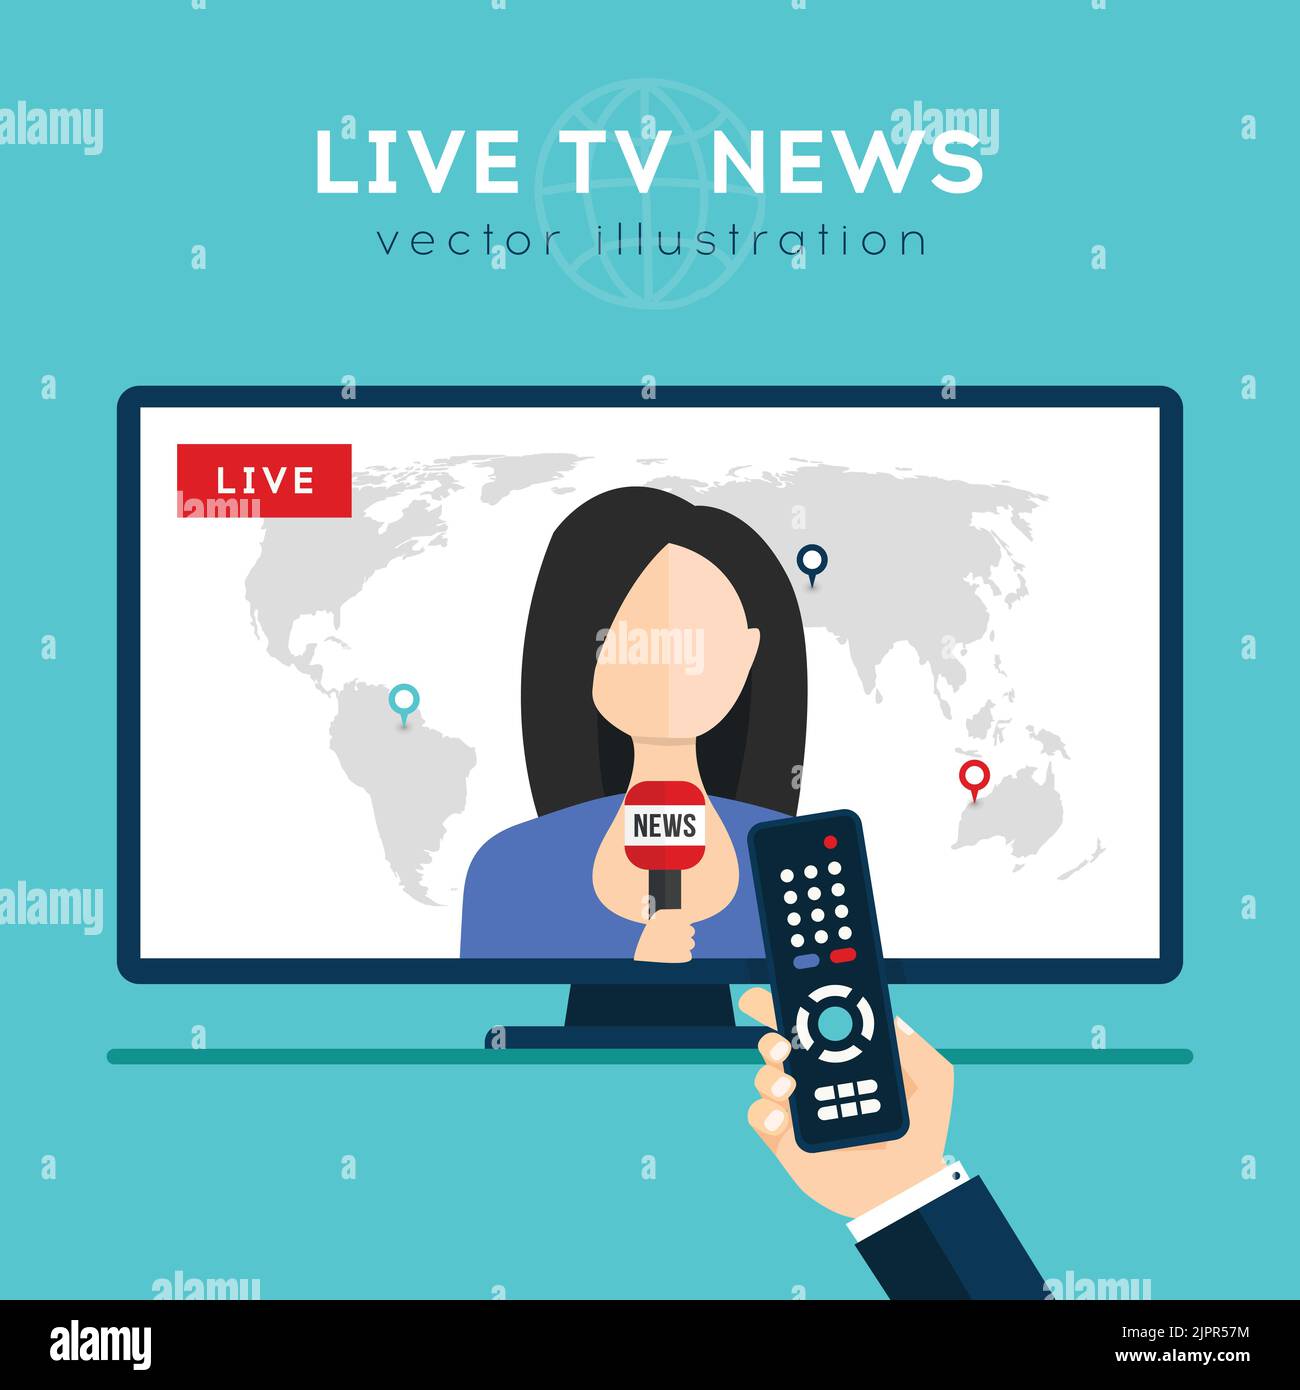 Live news on TV with female newsreader. Hand holding remote control and watching breaking news on TV. Flat icon in circle isolated on white background Stock Vector